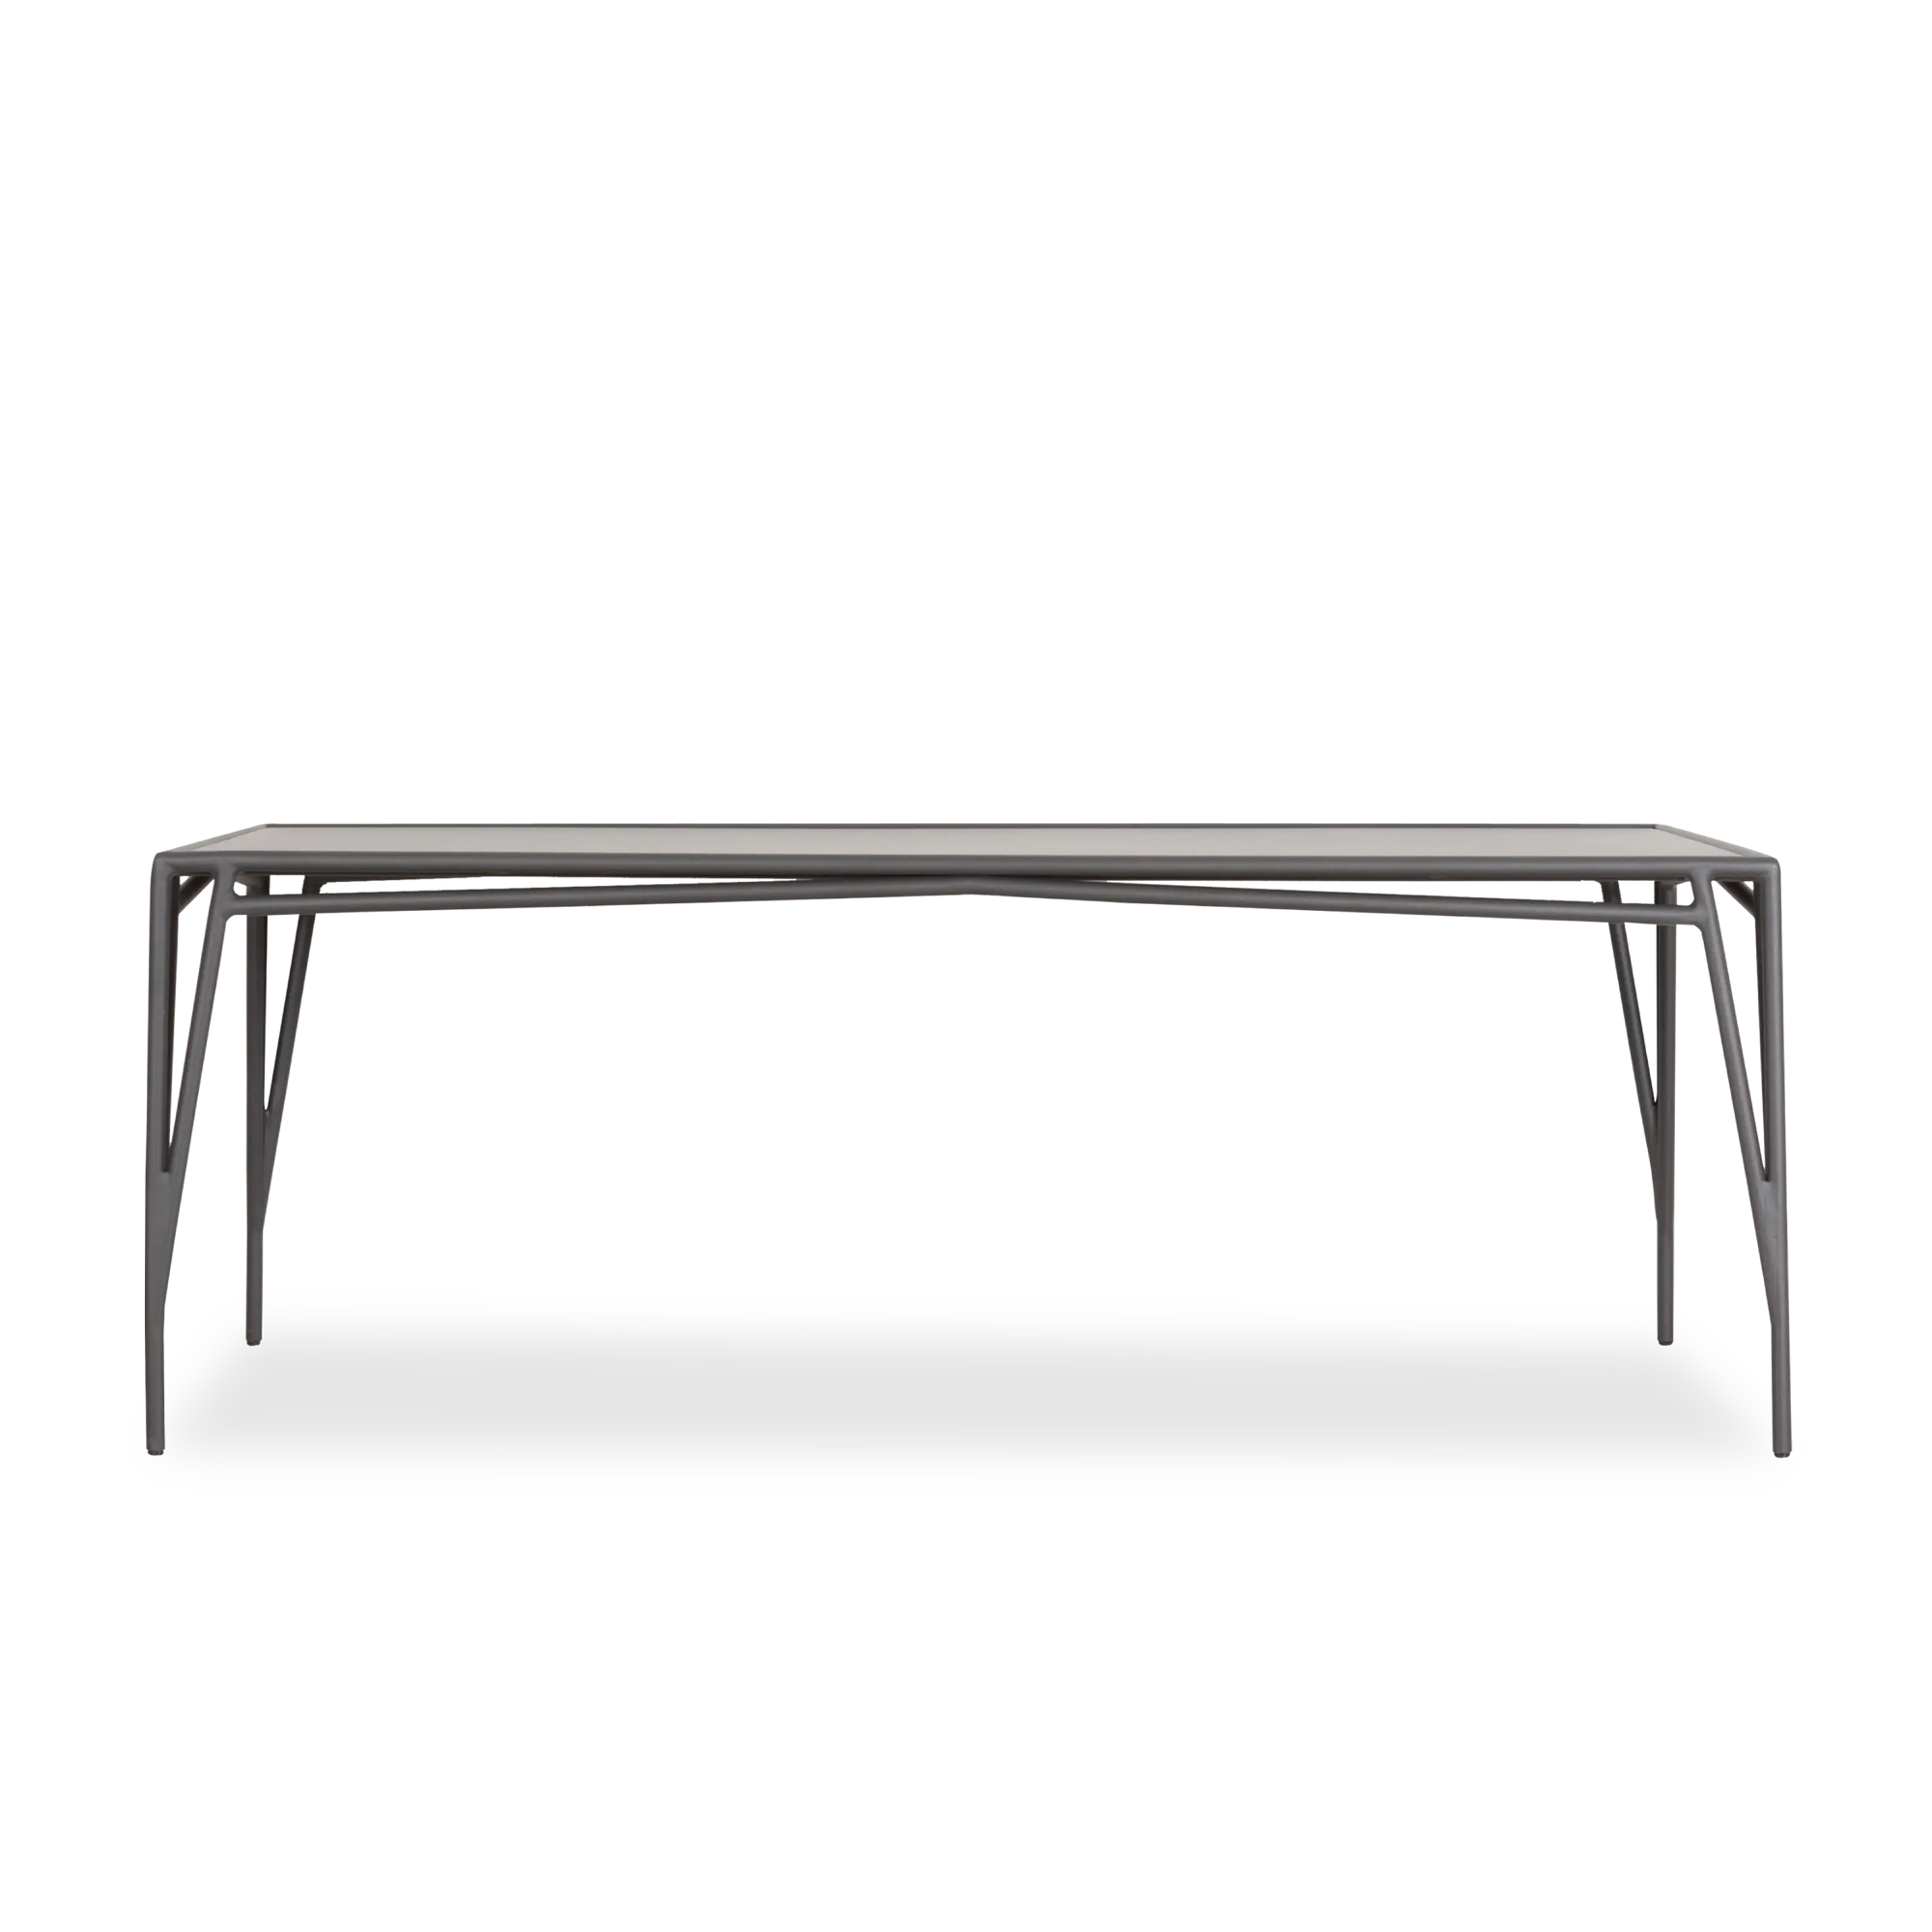 The Stretch Dining Table by Richard Frinier reveals a modern take on vintage Brown Jordan by creating a soft-modern frame design evoking a clear sense of balance and design integri